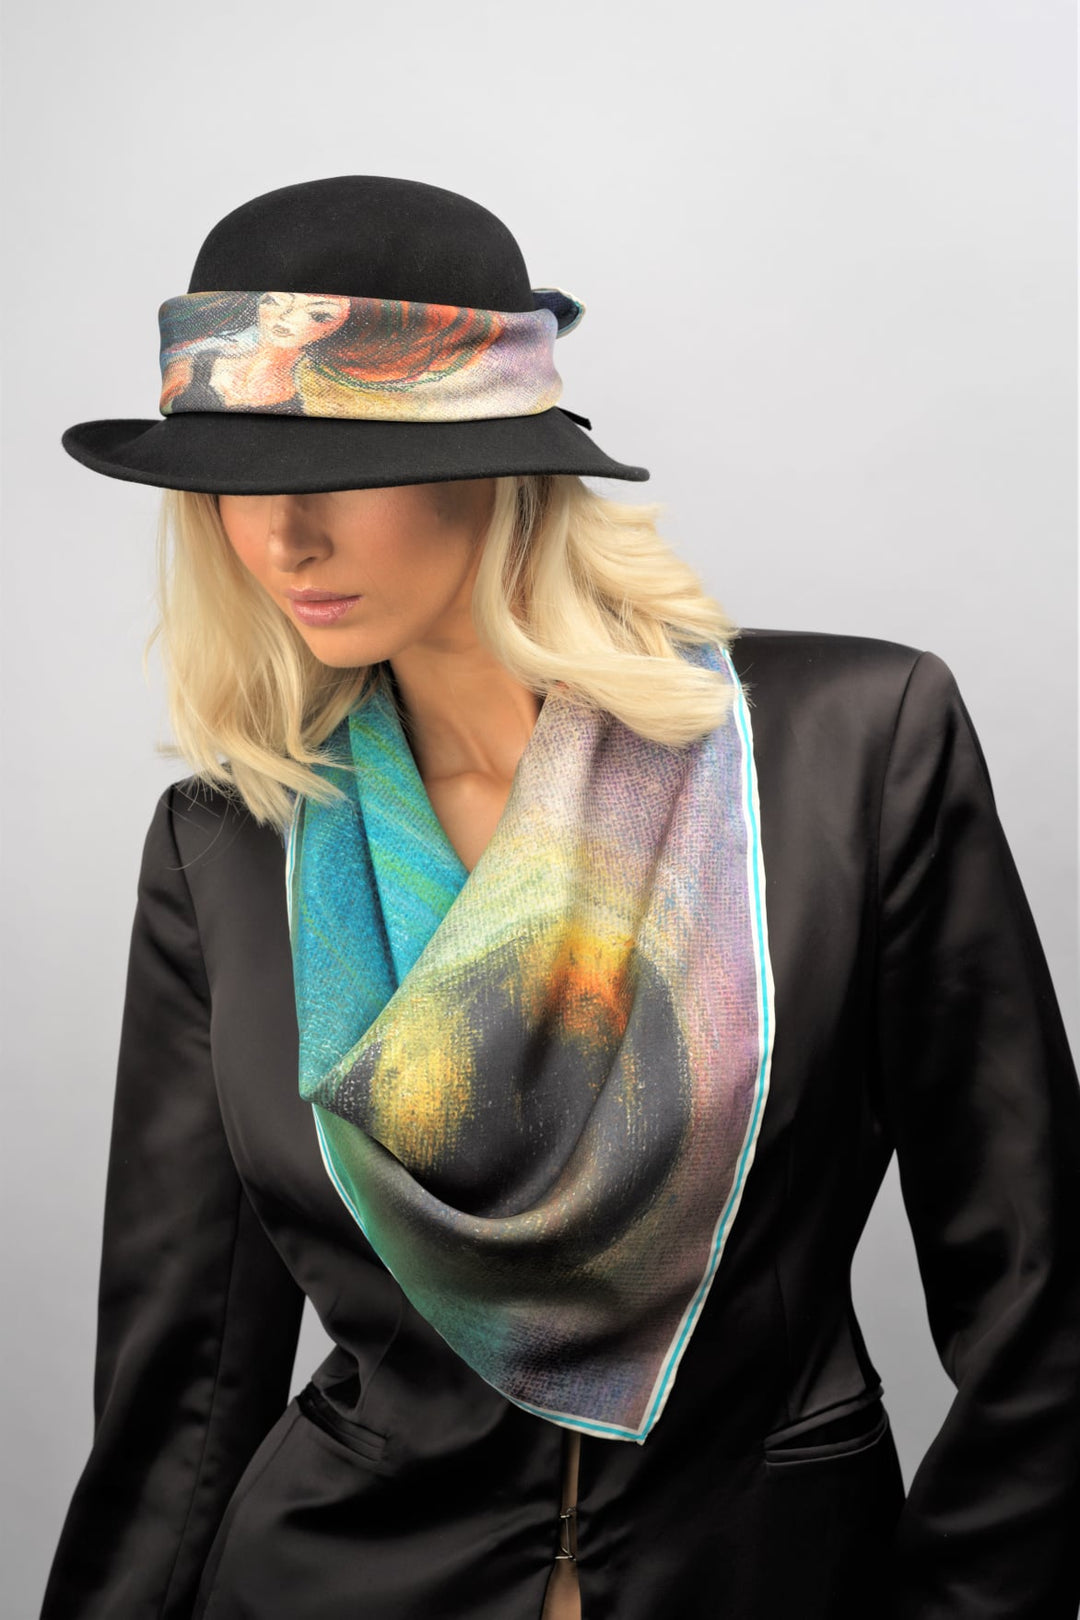 How To Wear A Silk Scarf as a bandana. BE GRATEFUL Wearable Art 100% Pure Silk Colorful Scarf by Chicago Fashion Designer Alesia Chaika